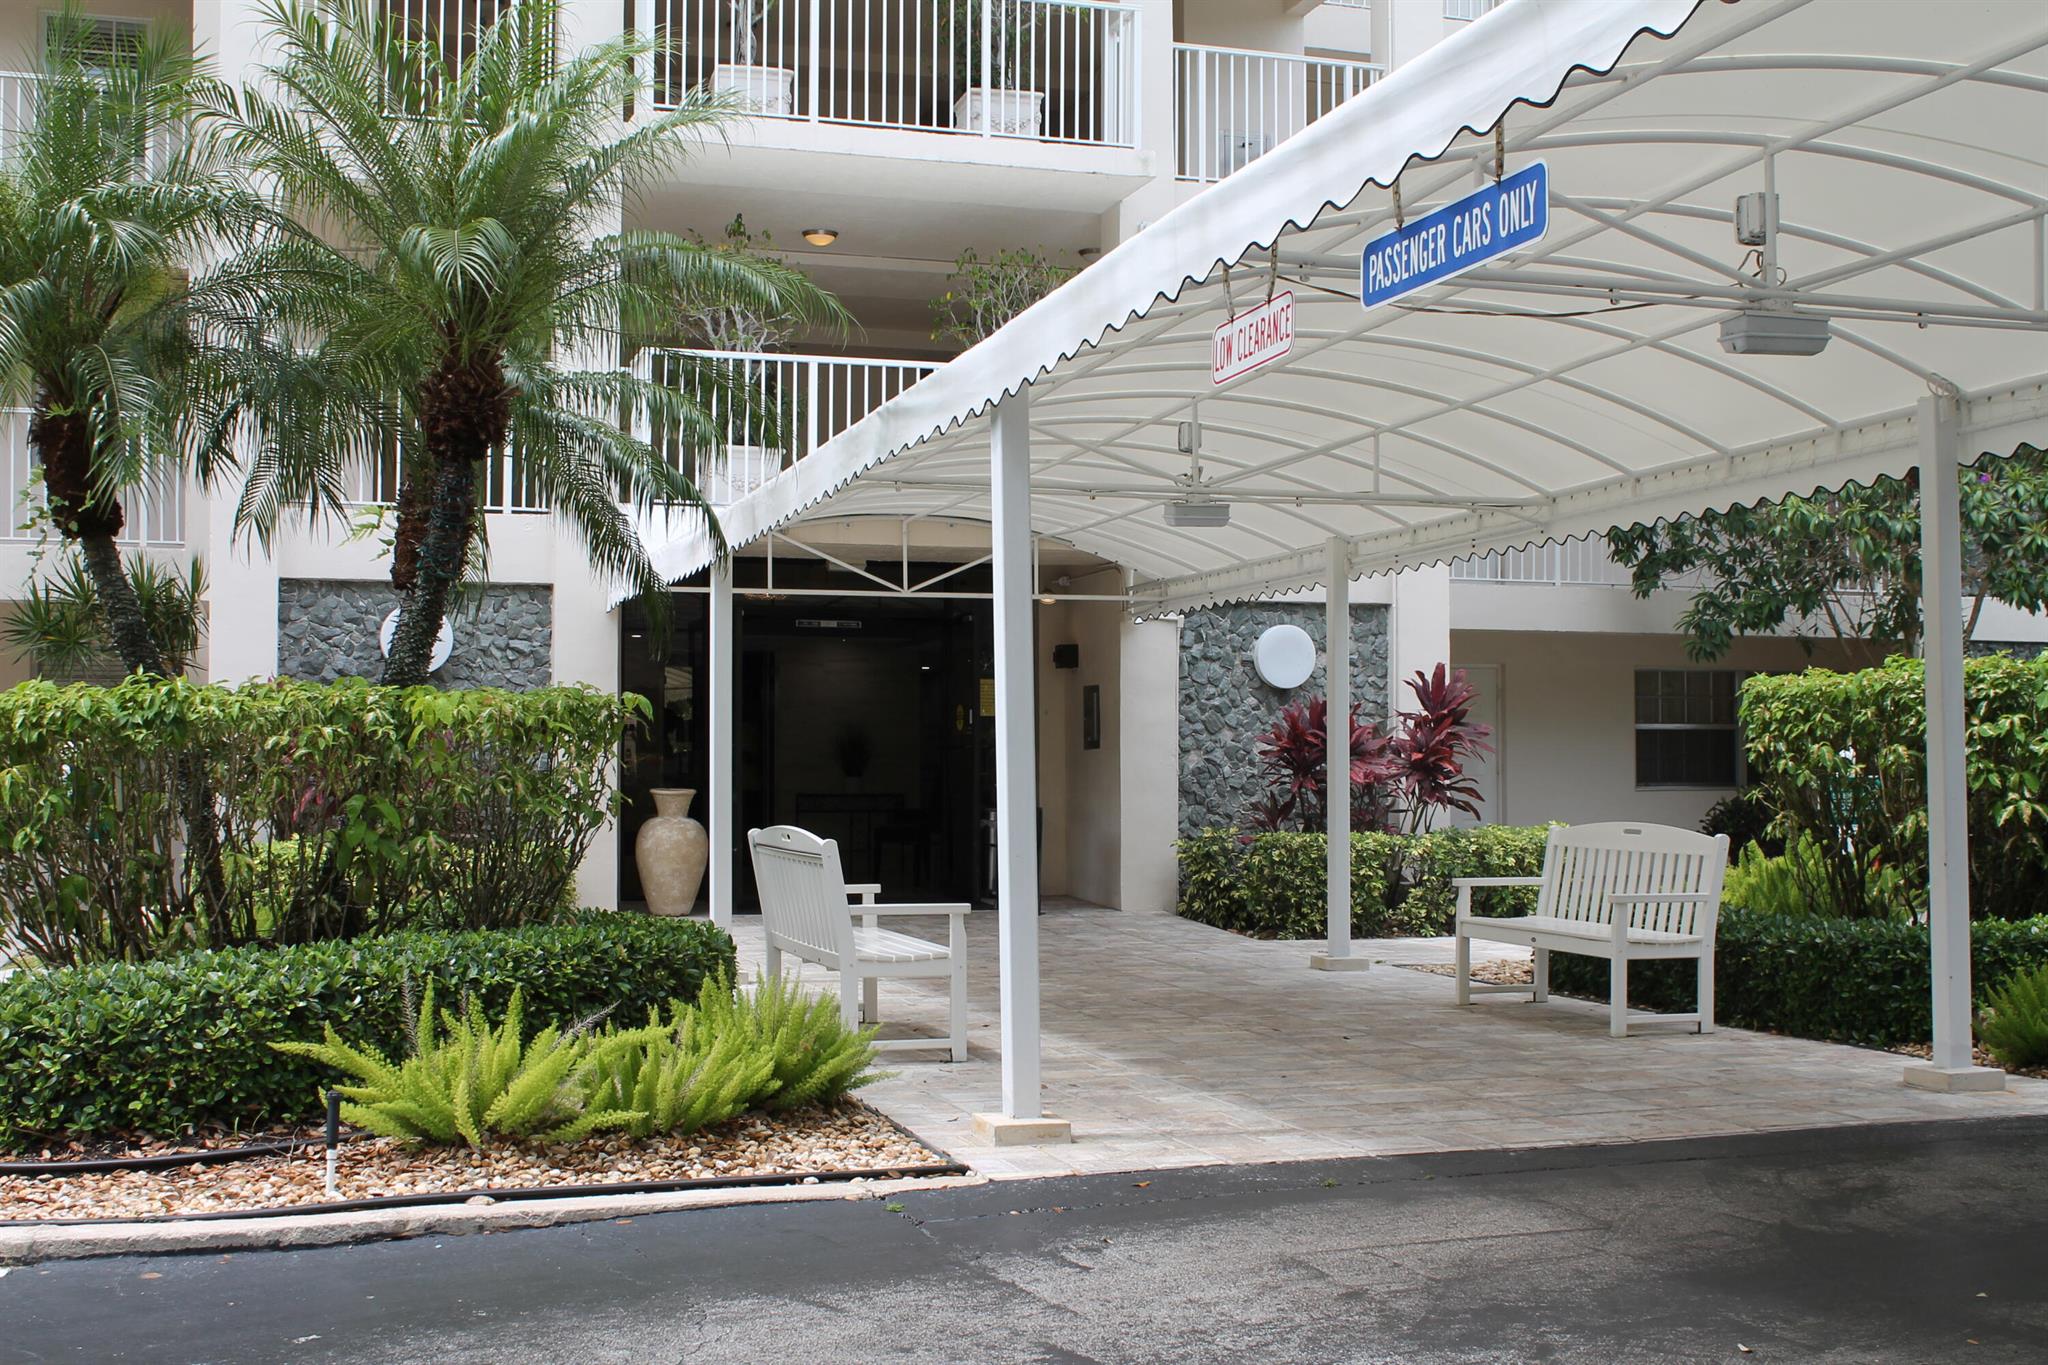 Photo 2 of Palm Aire Country Club Apt 607 in Pompano Beach - MLS R10915417